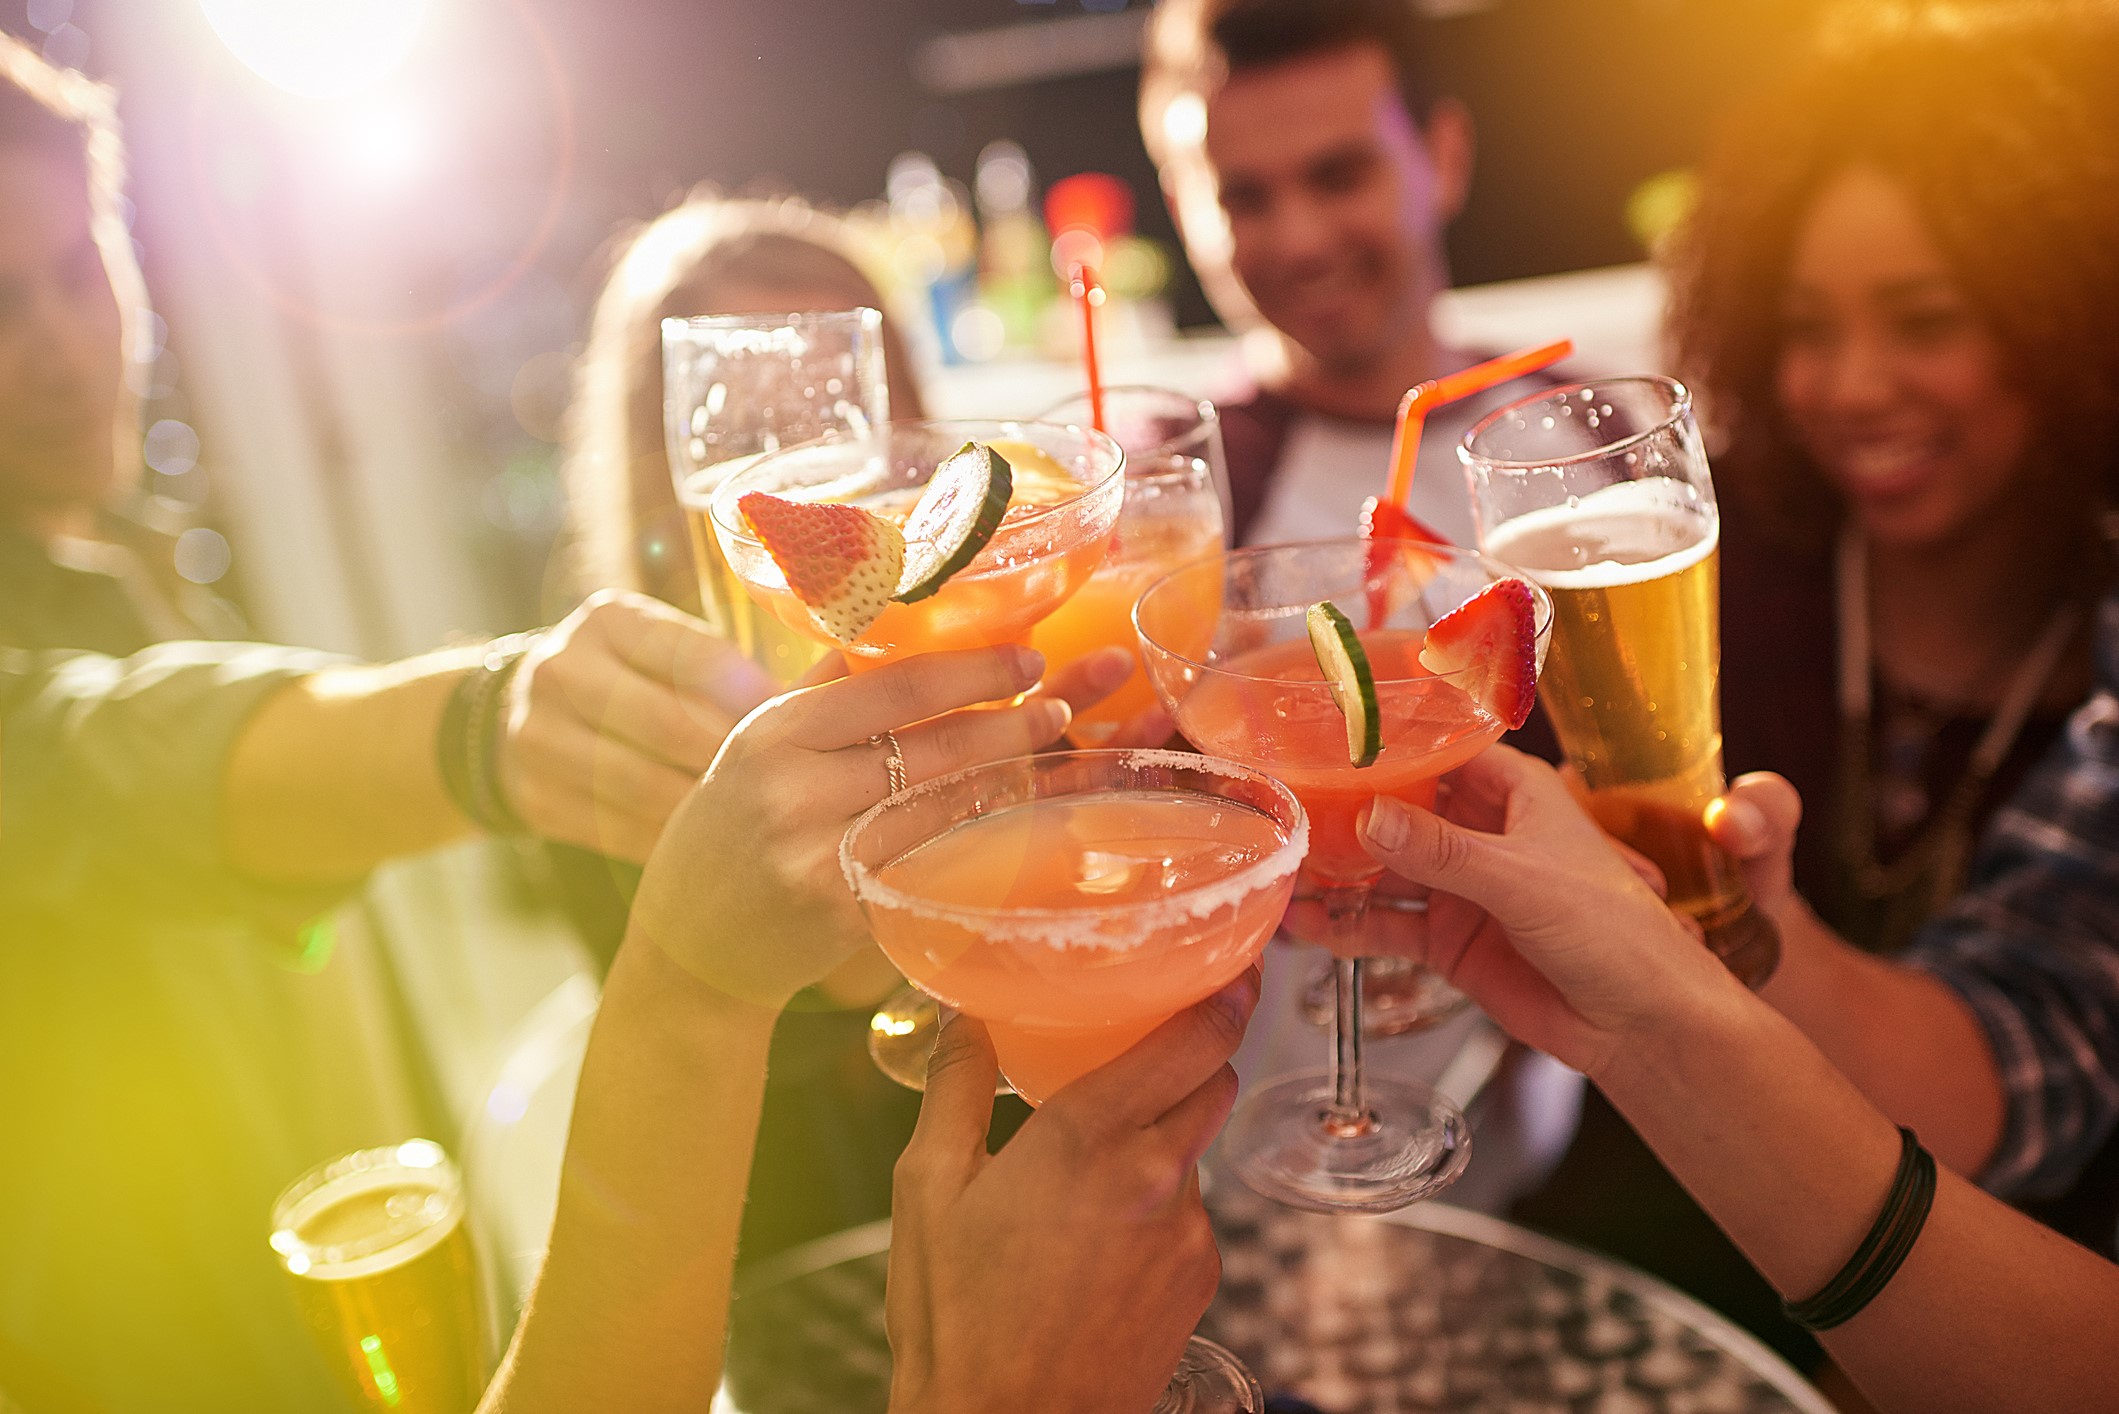 https://www.themanual.com/wp-content/uploads/sites/9/2021/07/people-toasting-with-their-cocktails-at-a-party.jpg?fit=800%2C800&p=1